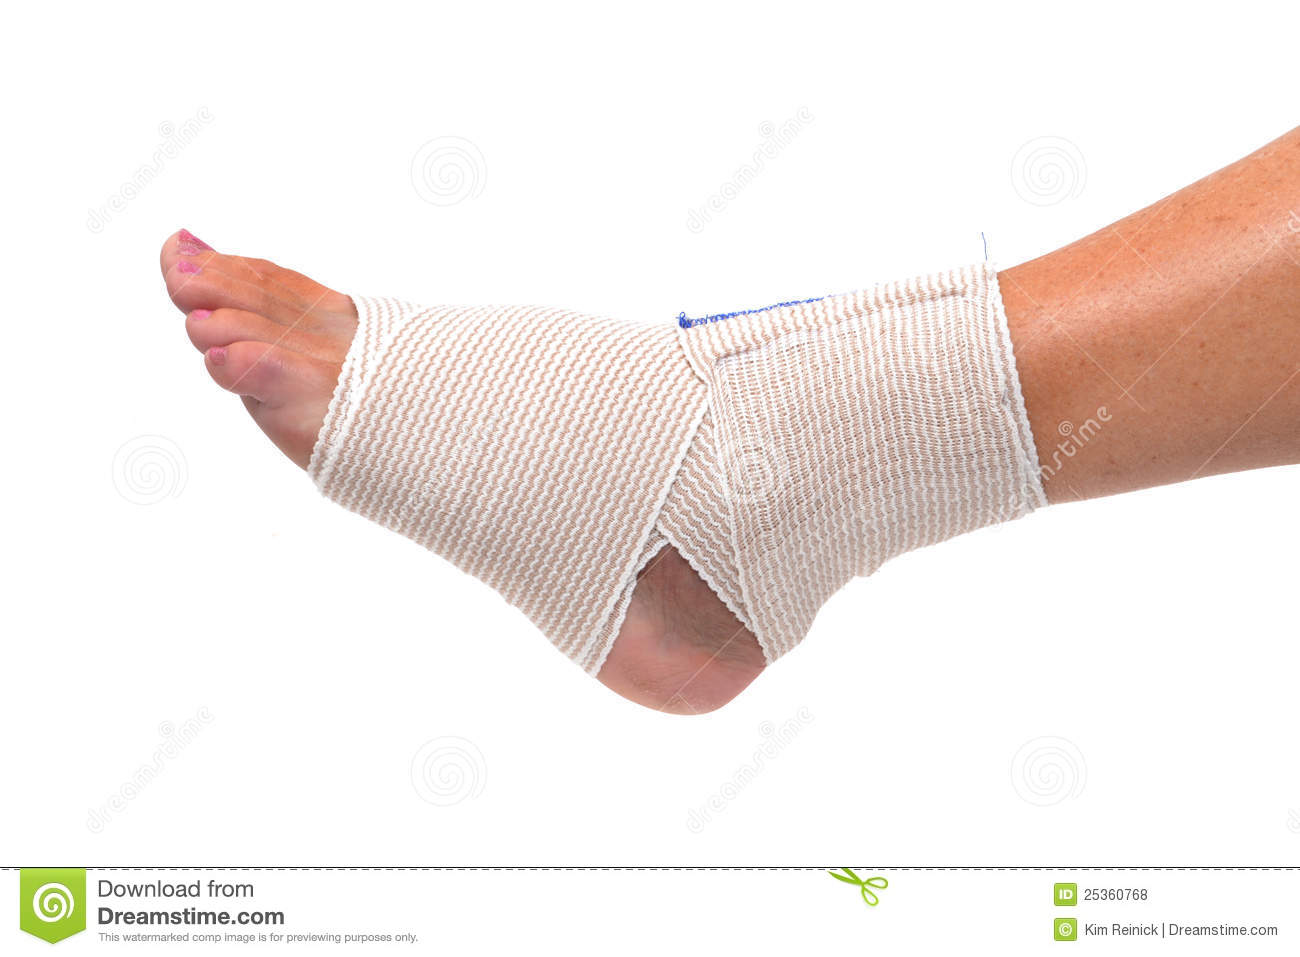 Wrapped Foot Royalty Free Stock Photos   Image  25360768